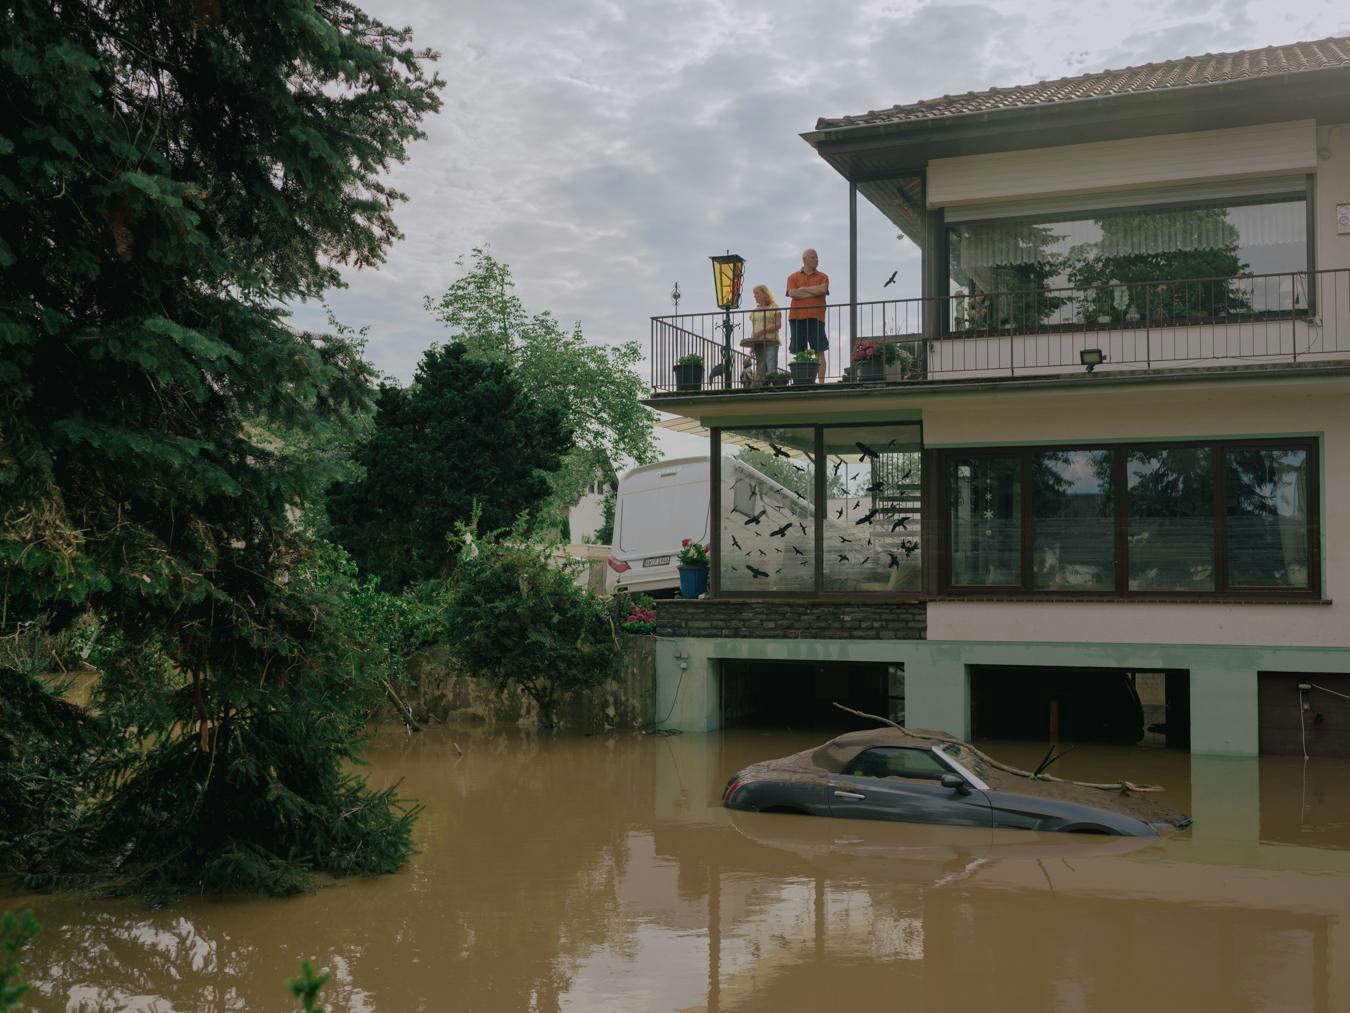 People on the balcony of a house in Ahrweiler. On the first day after the flood, the extent of the destruction was difficult to assess, so there was a disastrous shortage of equipment and emergency personnel in the flooded area. Ahrweiler, July 15, 2021 © DOCKS collective